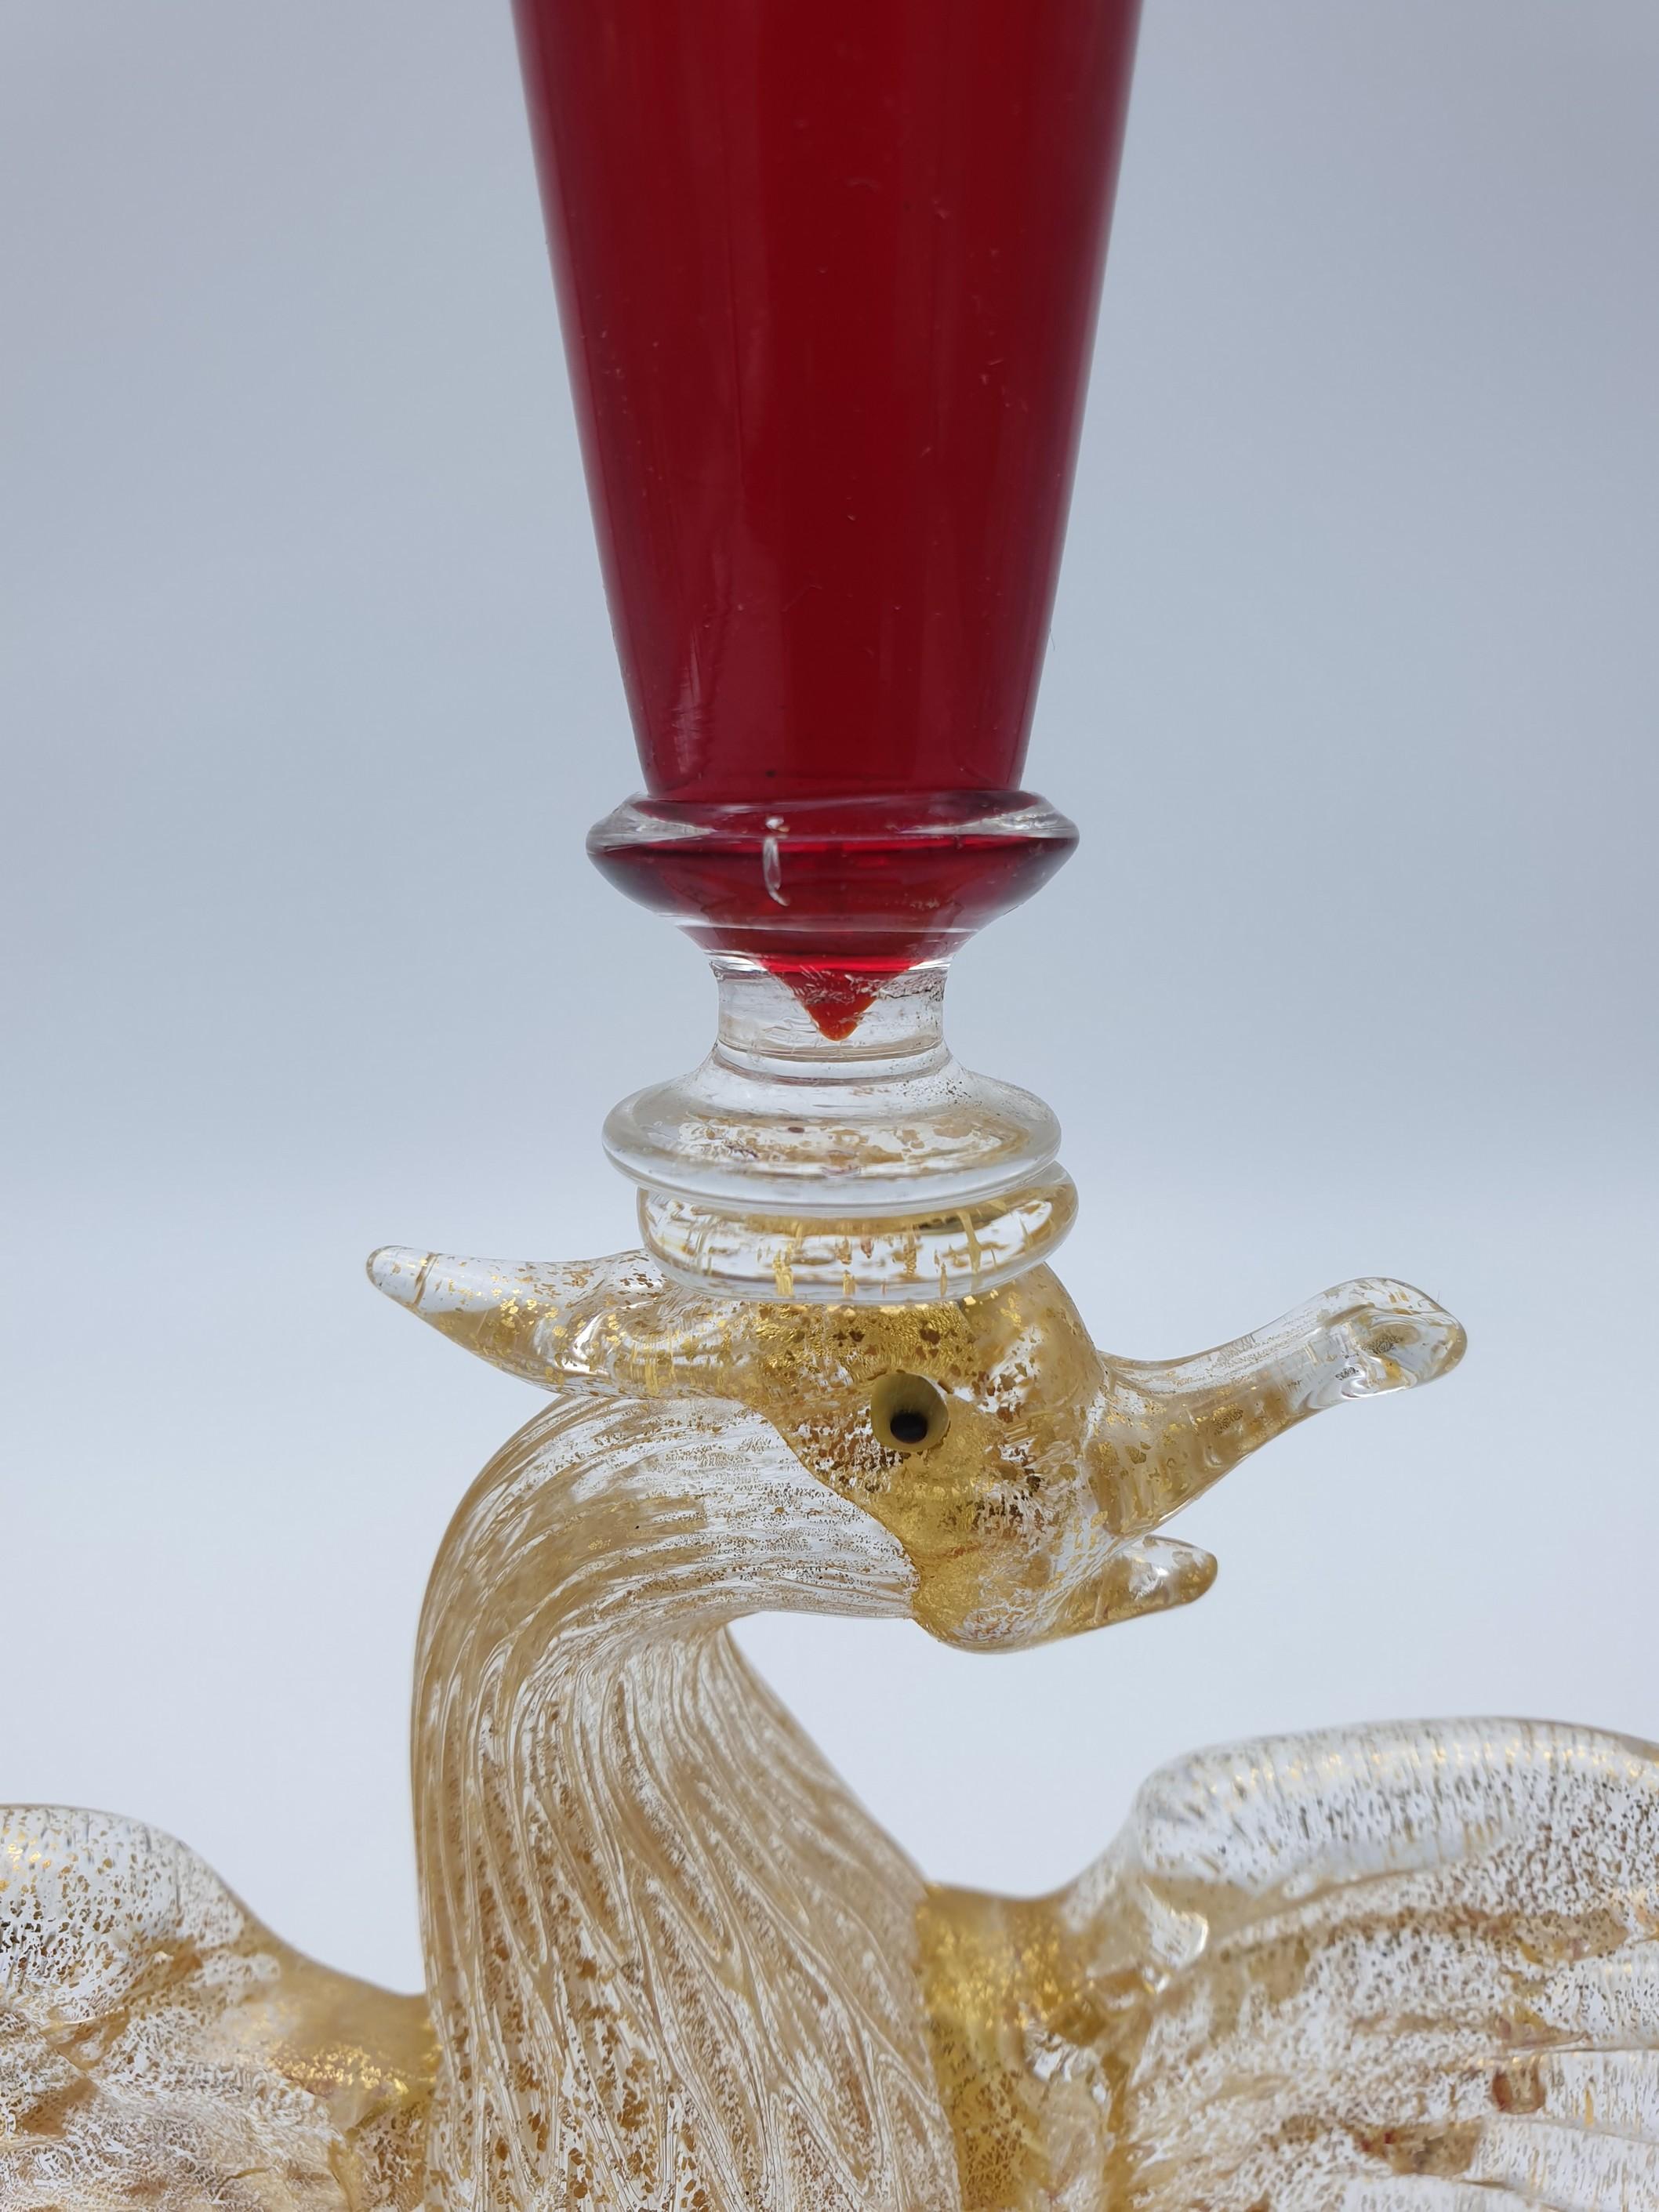 Pair of Modern Murano Glass Red Goblets with Gold Phoenix by Gino Cenedese 1990s For Sale 8